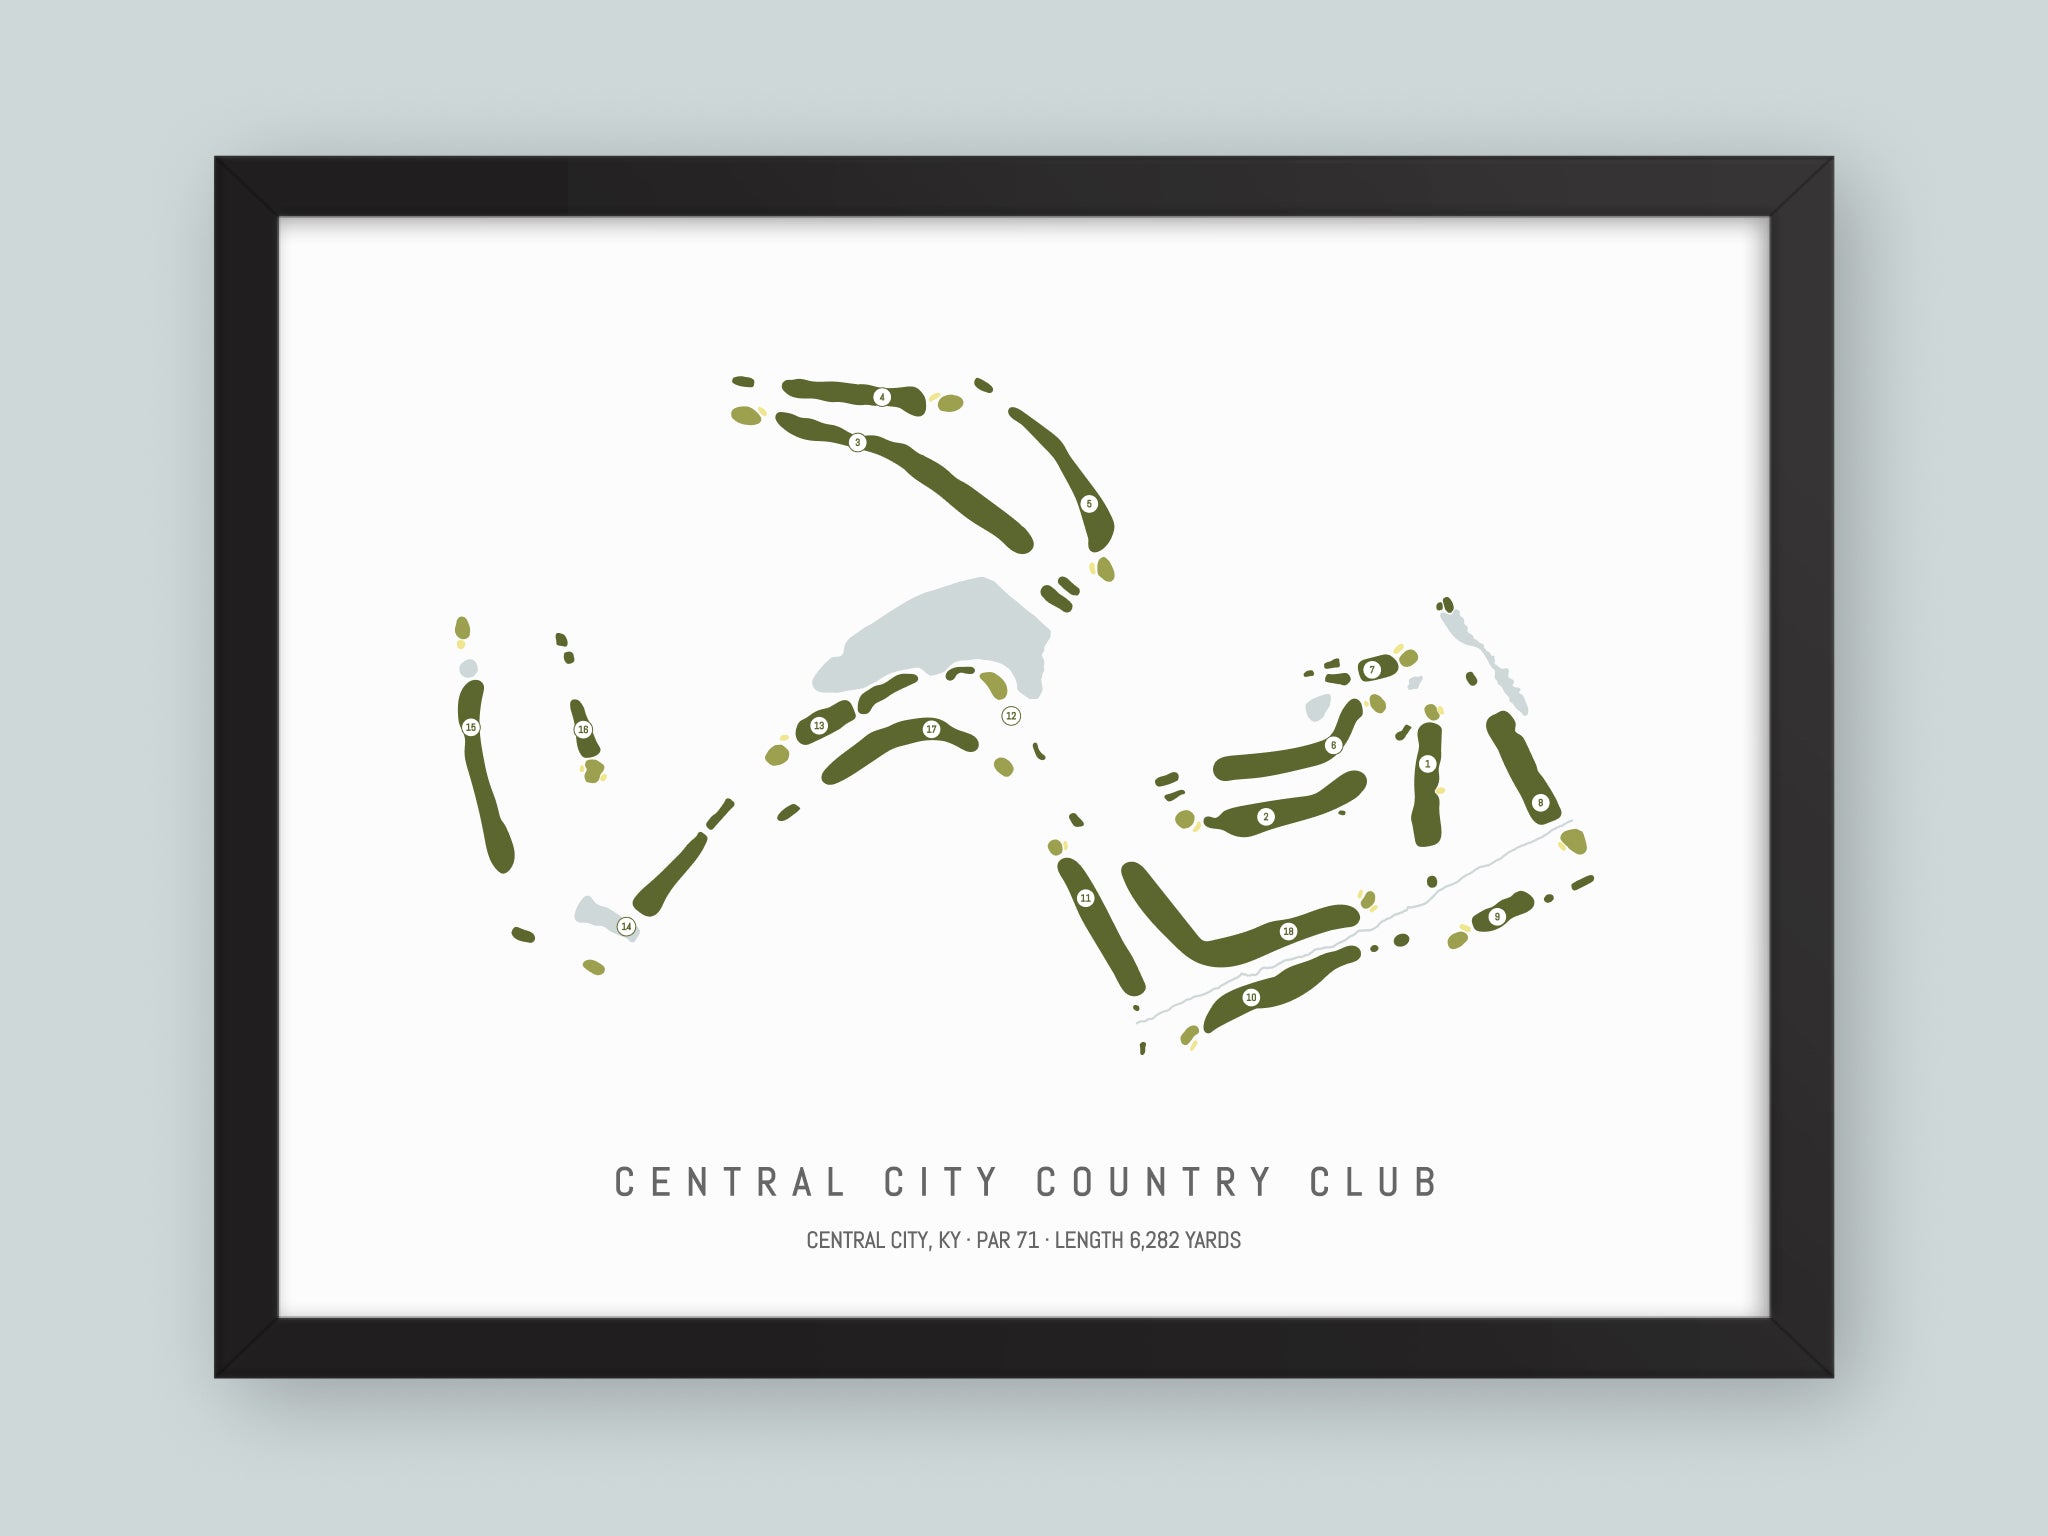 Central-City-Country-Club-KY--Black-Frame-24x18-With-Hole-Numbers